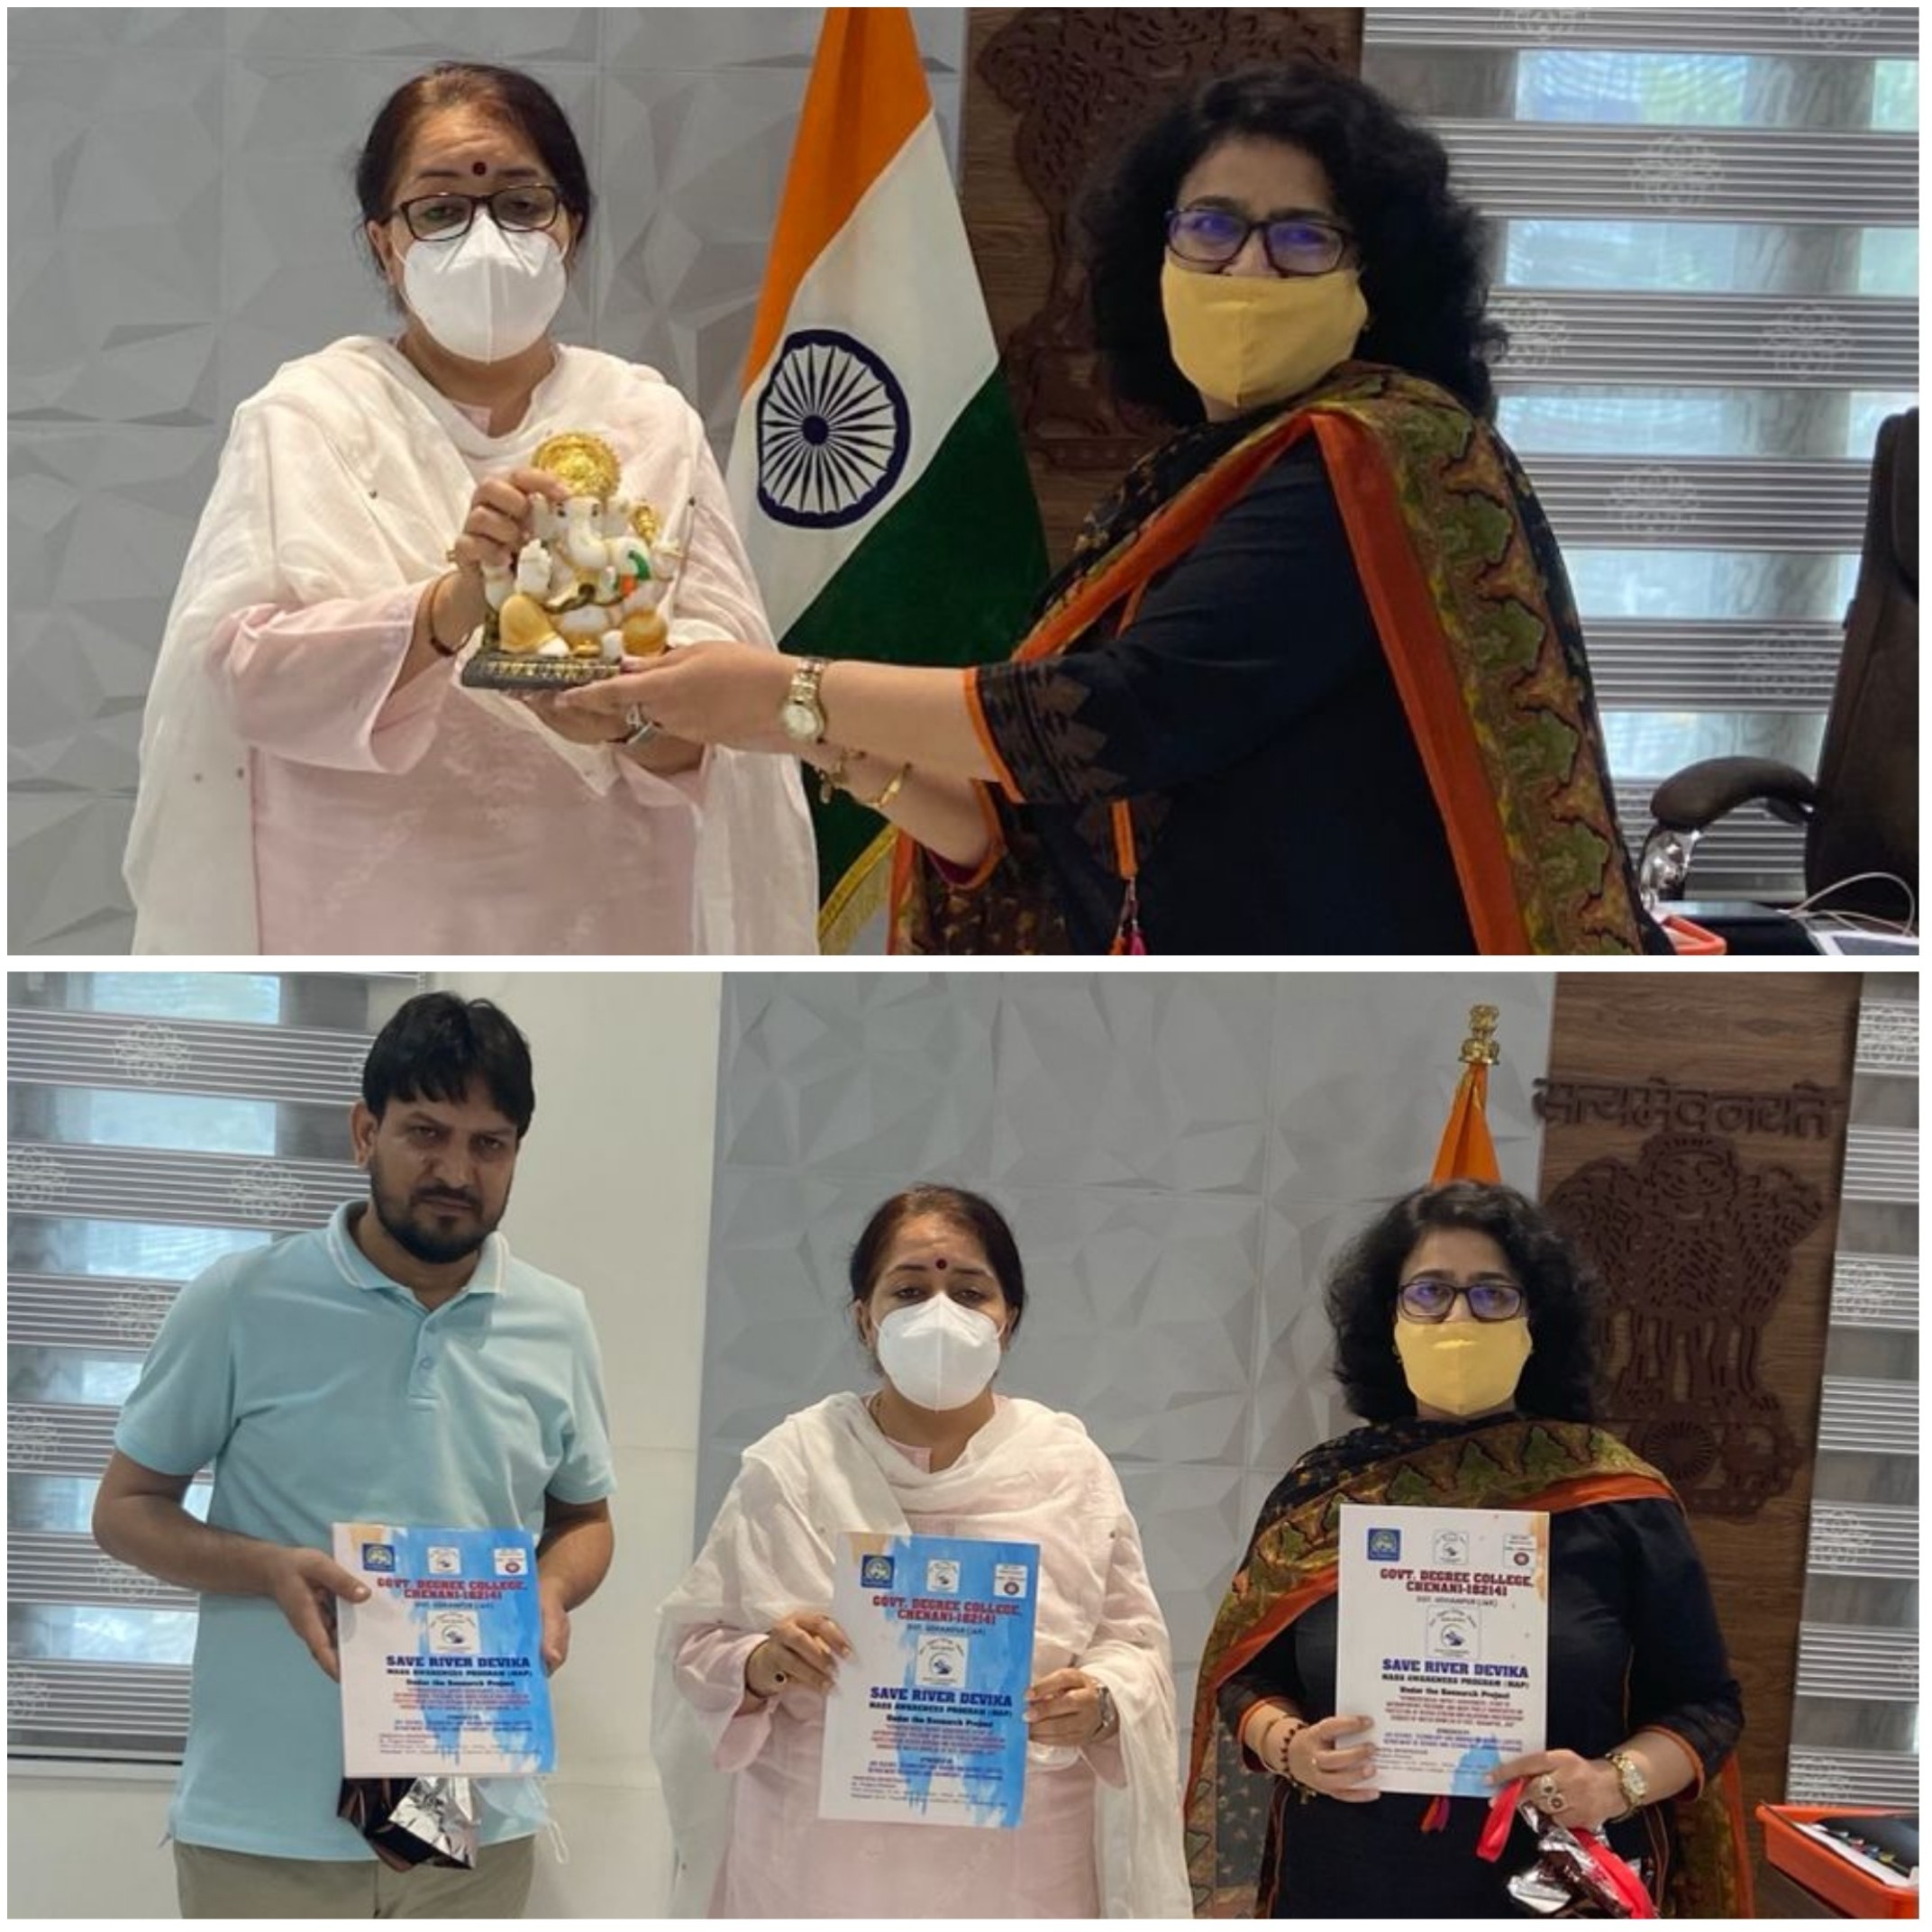 DEPUTY COMMISSIONER, UDHAMPUR RELEASES A BOOKLET ON ‘SAVE DEVIKA’ COMPILED BY DR. PRAGYA KHANNA, PR. INVESTIGATOR, DST, RESEARCH PROJECT, GOVT. DEGREE COLLEGE, CHENANI (9th Sept. 2021)